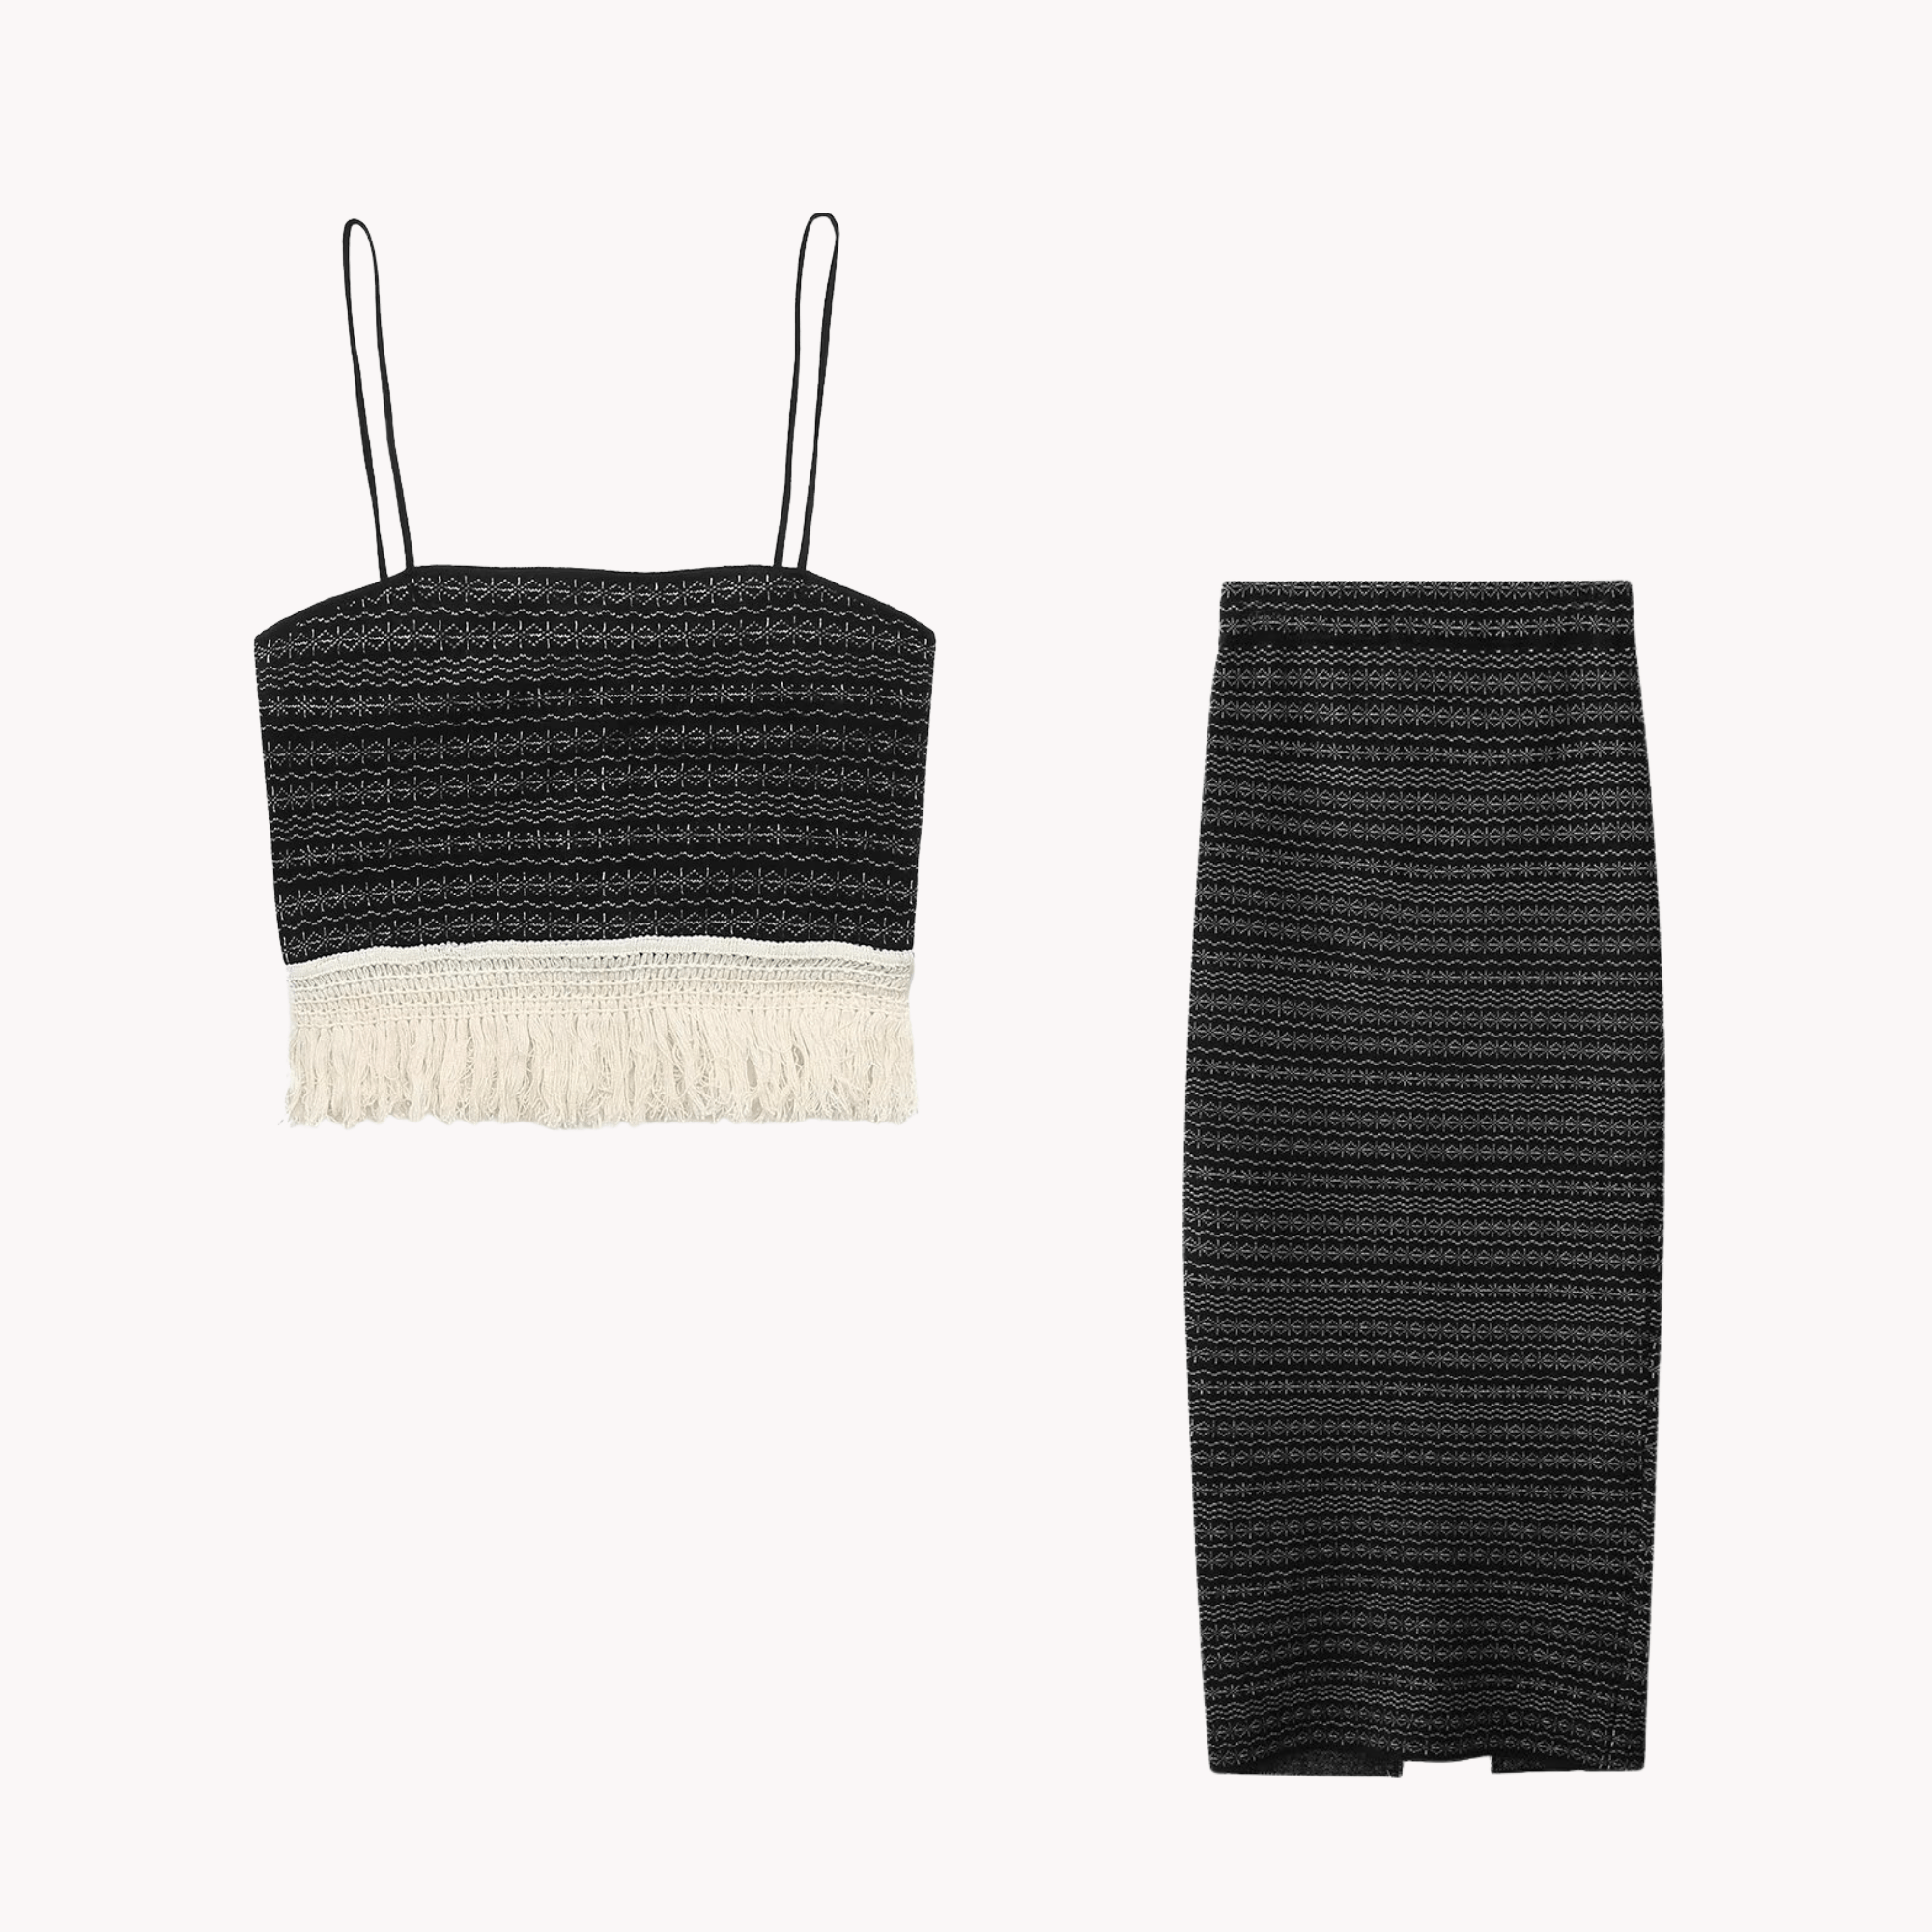 Jacquard Knitted Top and Skirt Set - Kelly Obi New York